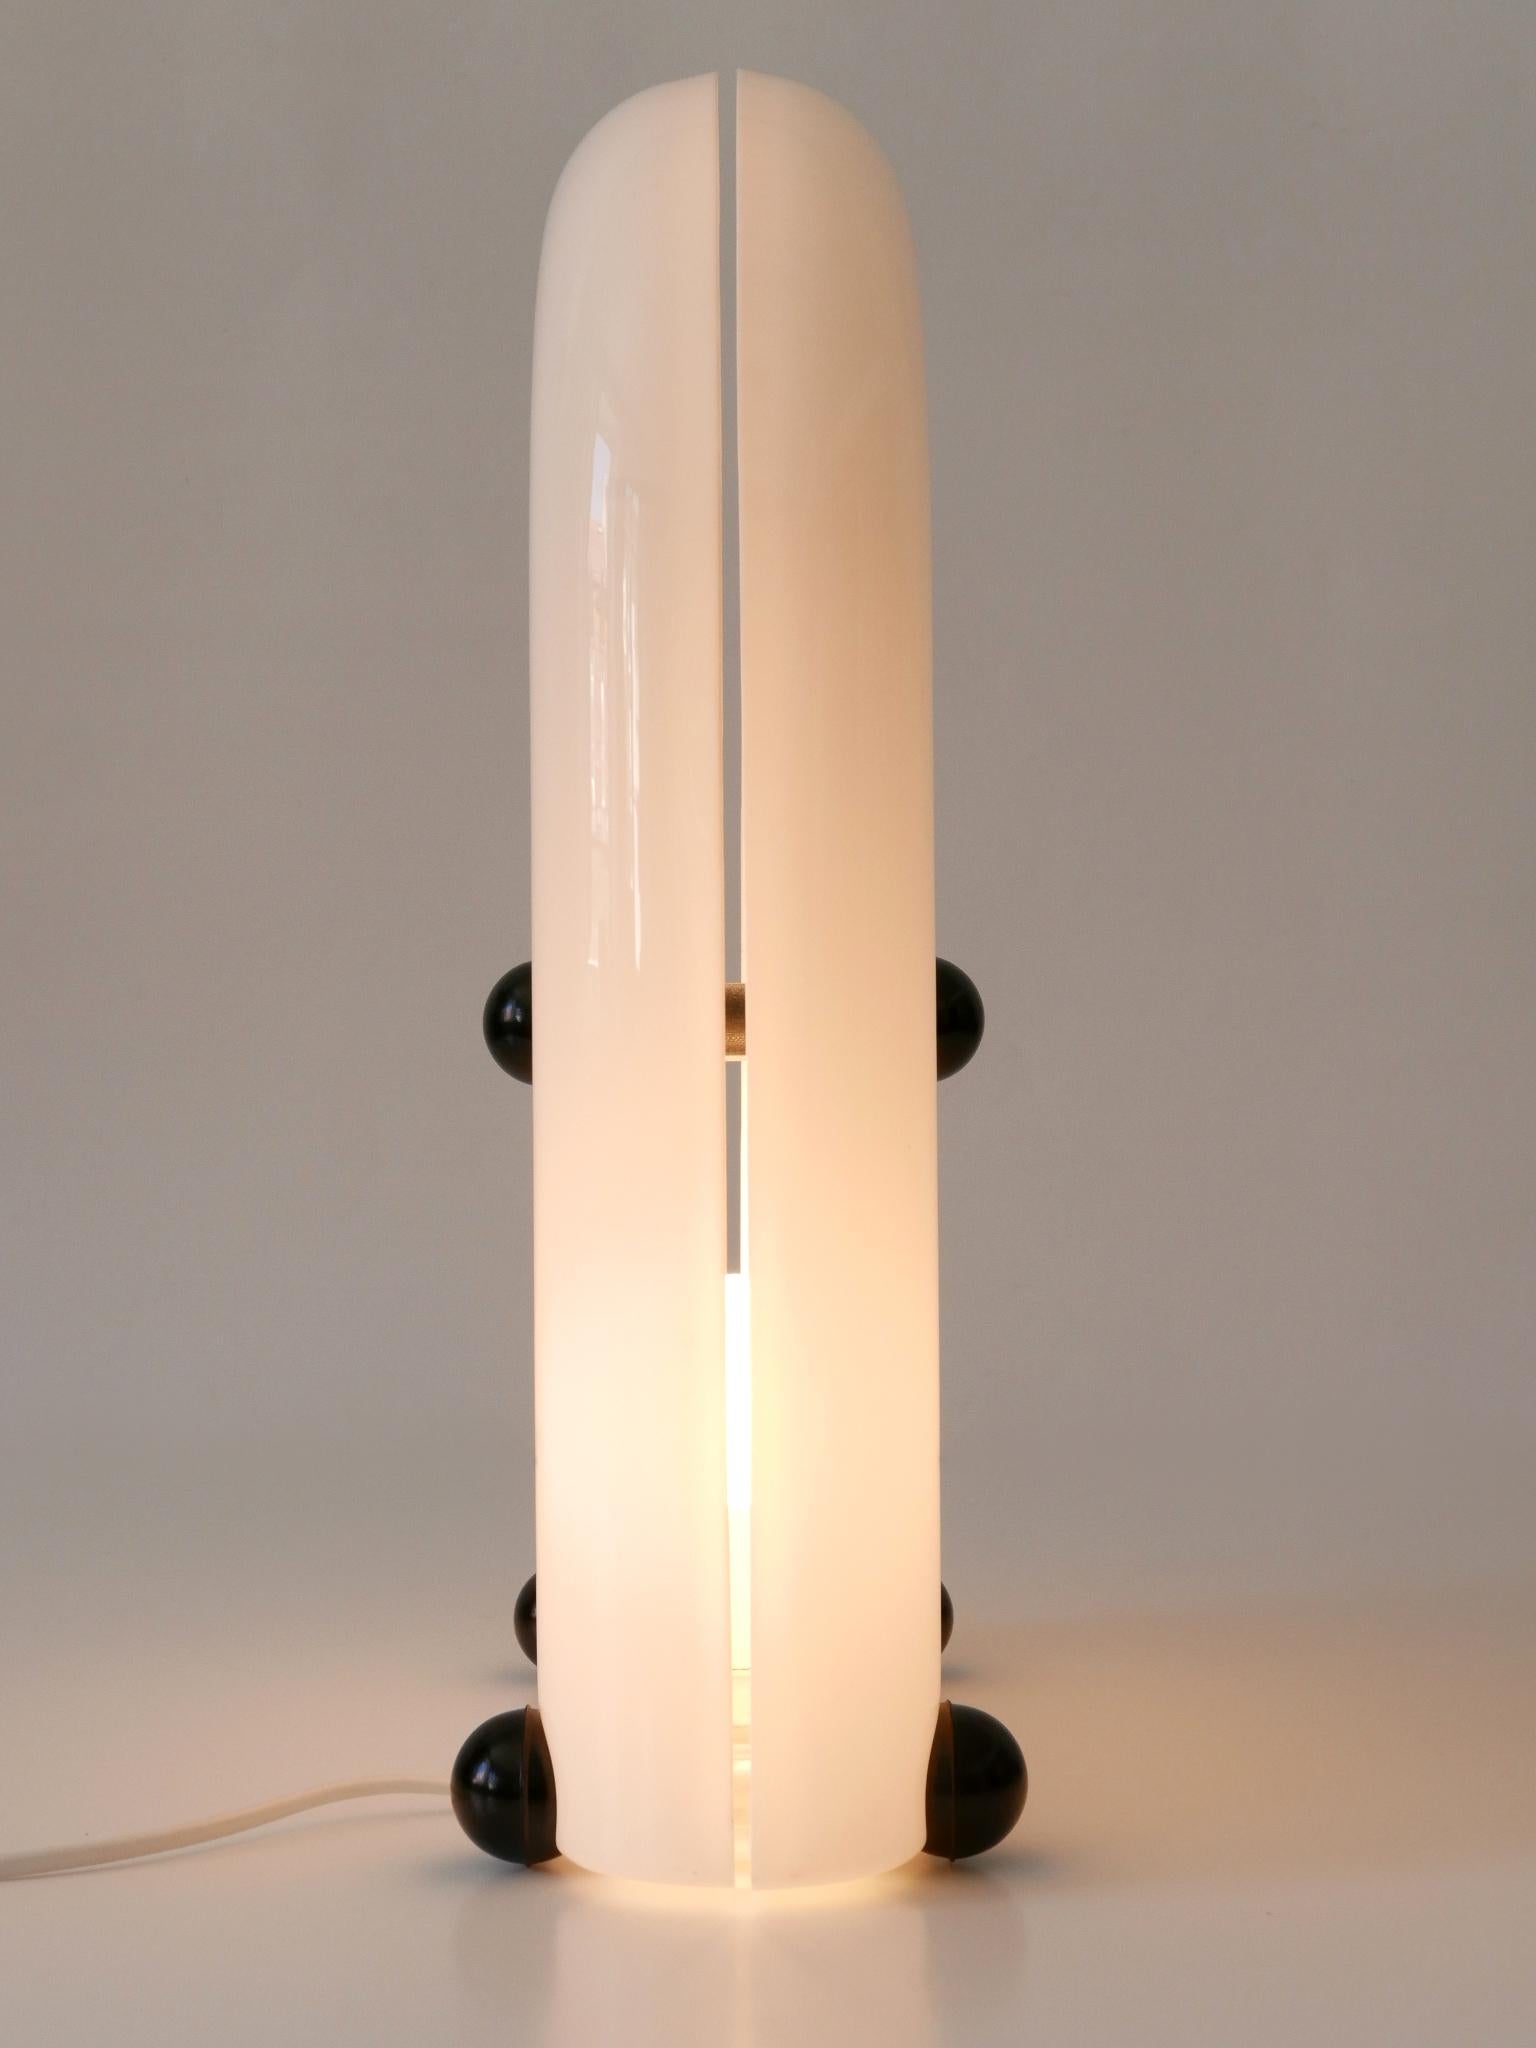 Extremely Rare Lucite Table Lamp or Floor Light by Elio Martinelli 1969 Italy For Sale 4